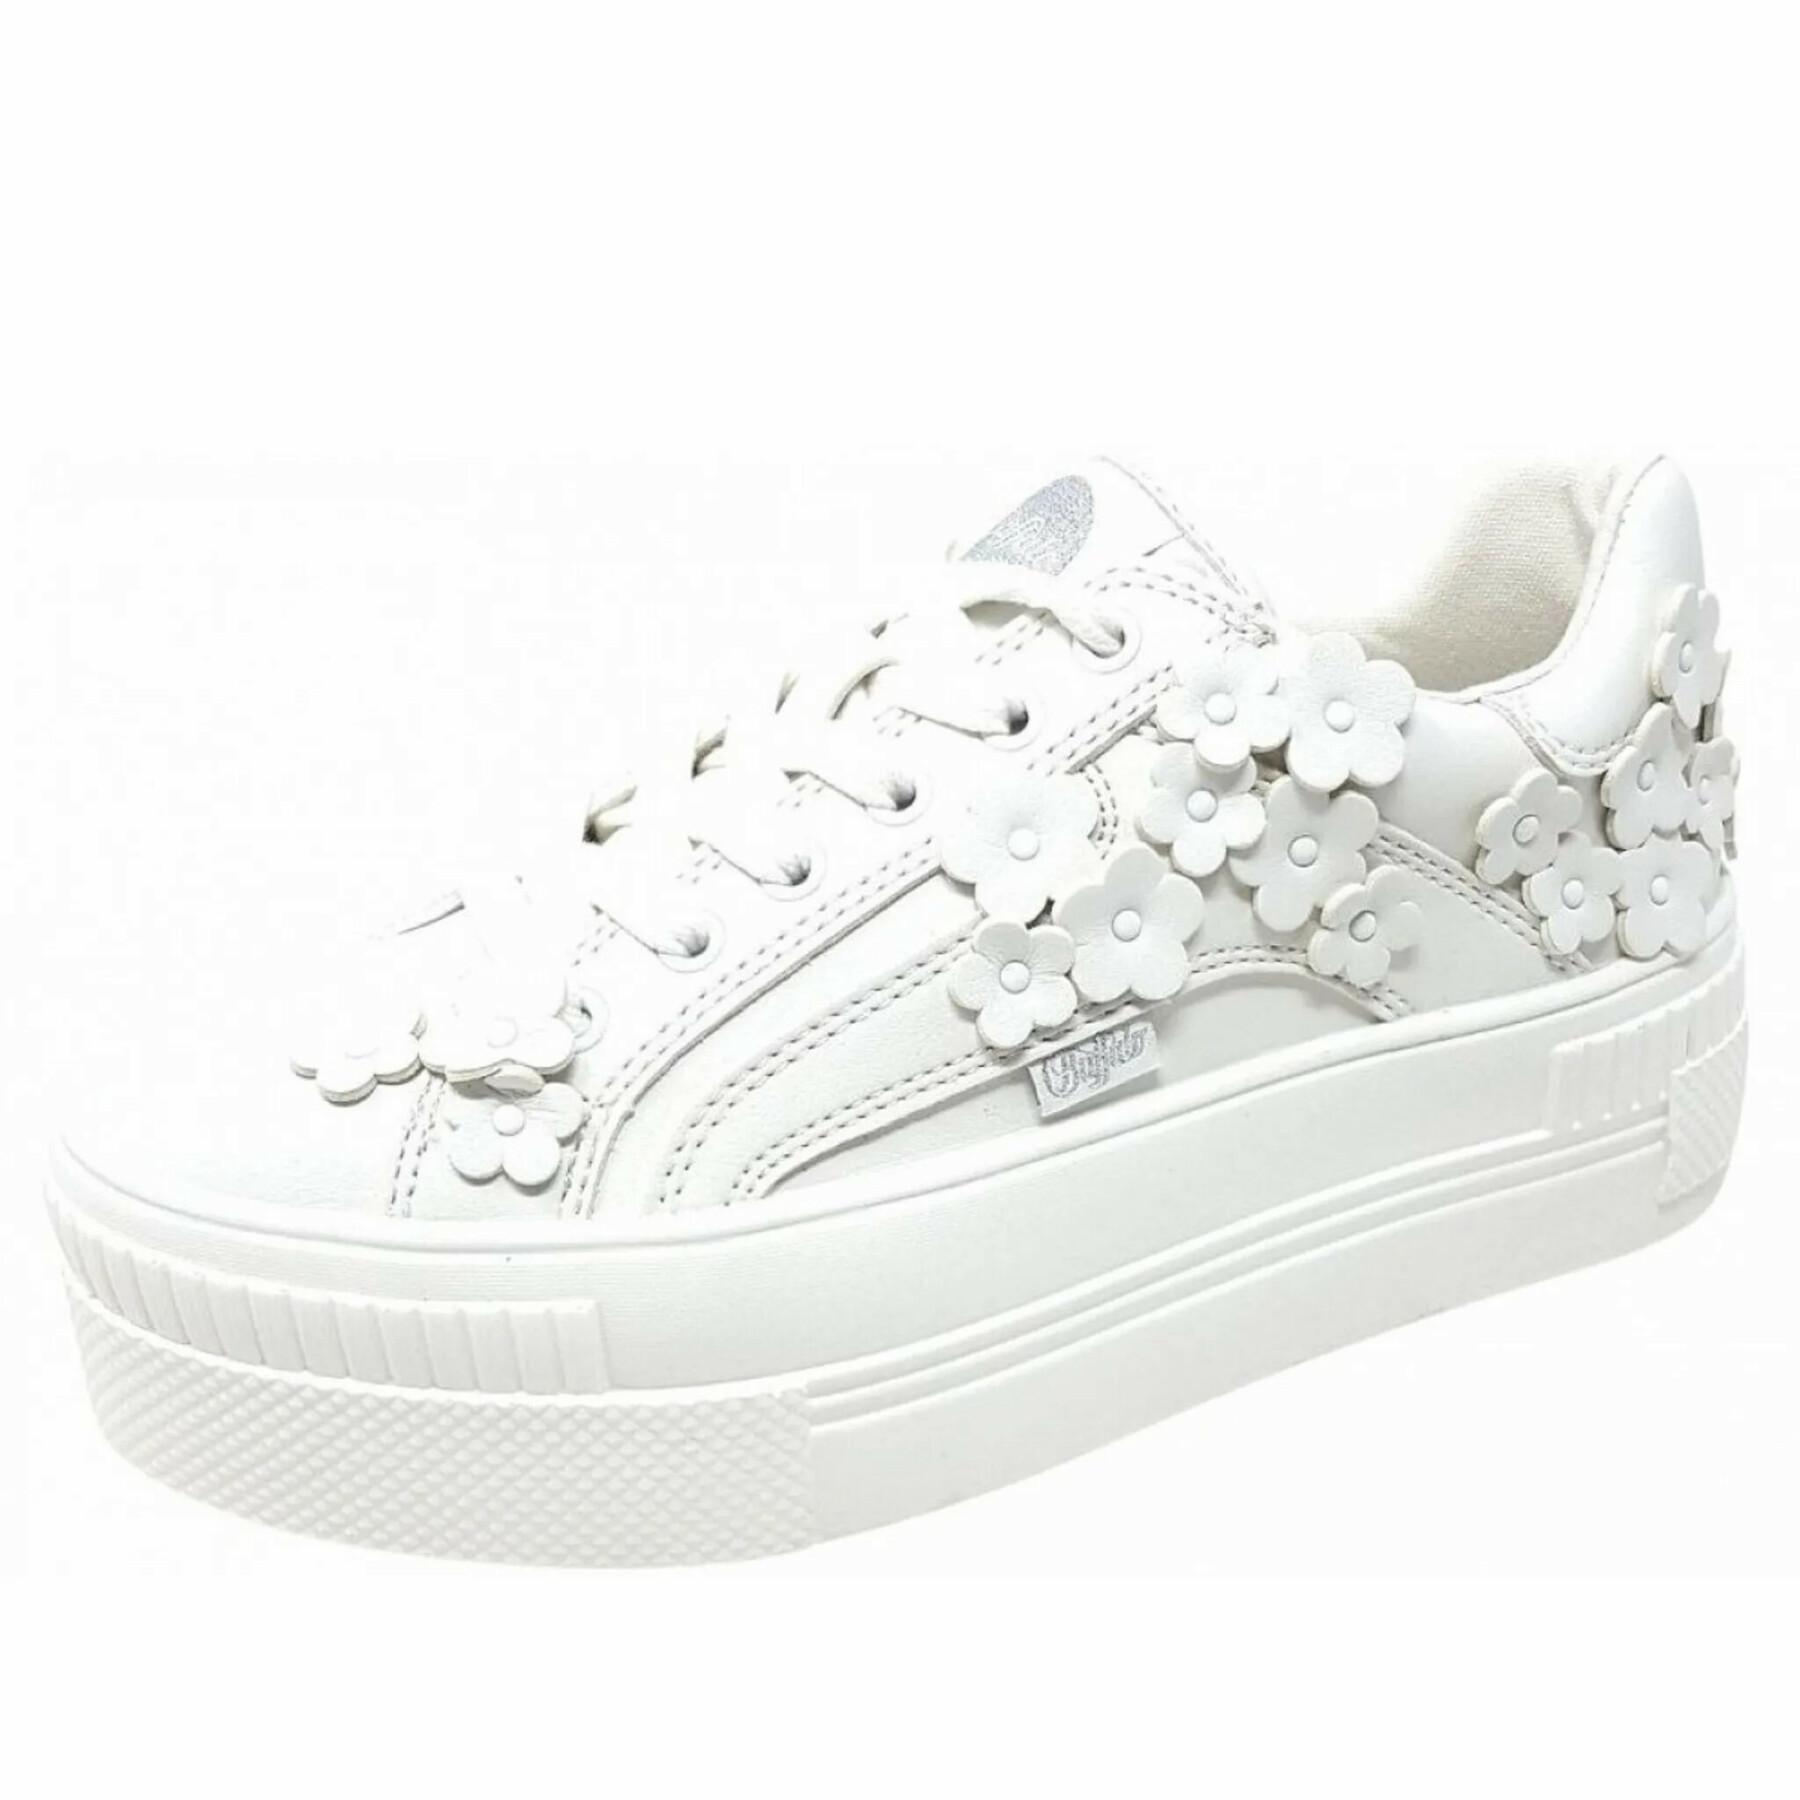 Women's sneakers Buffalo Paired daisies